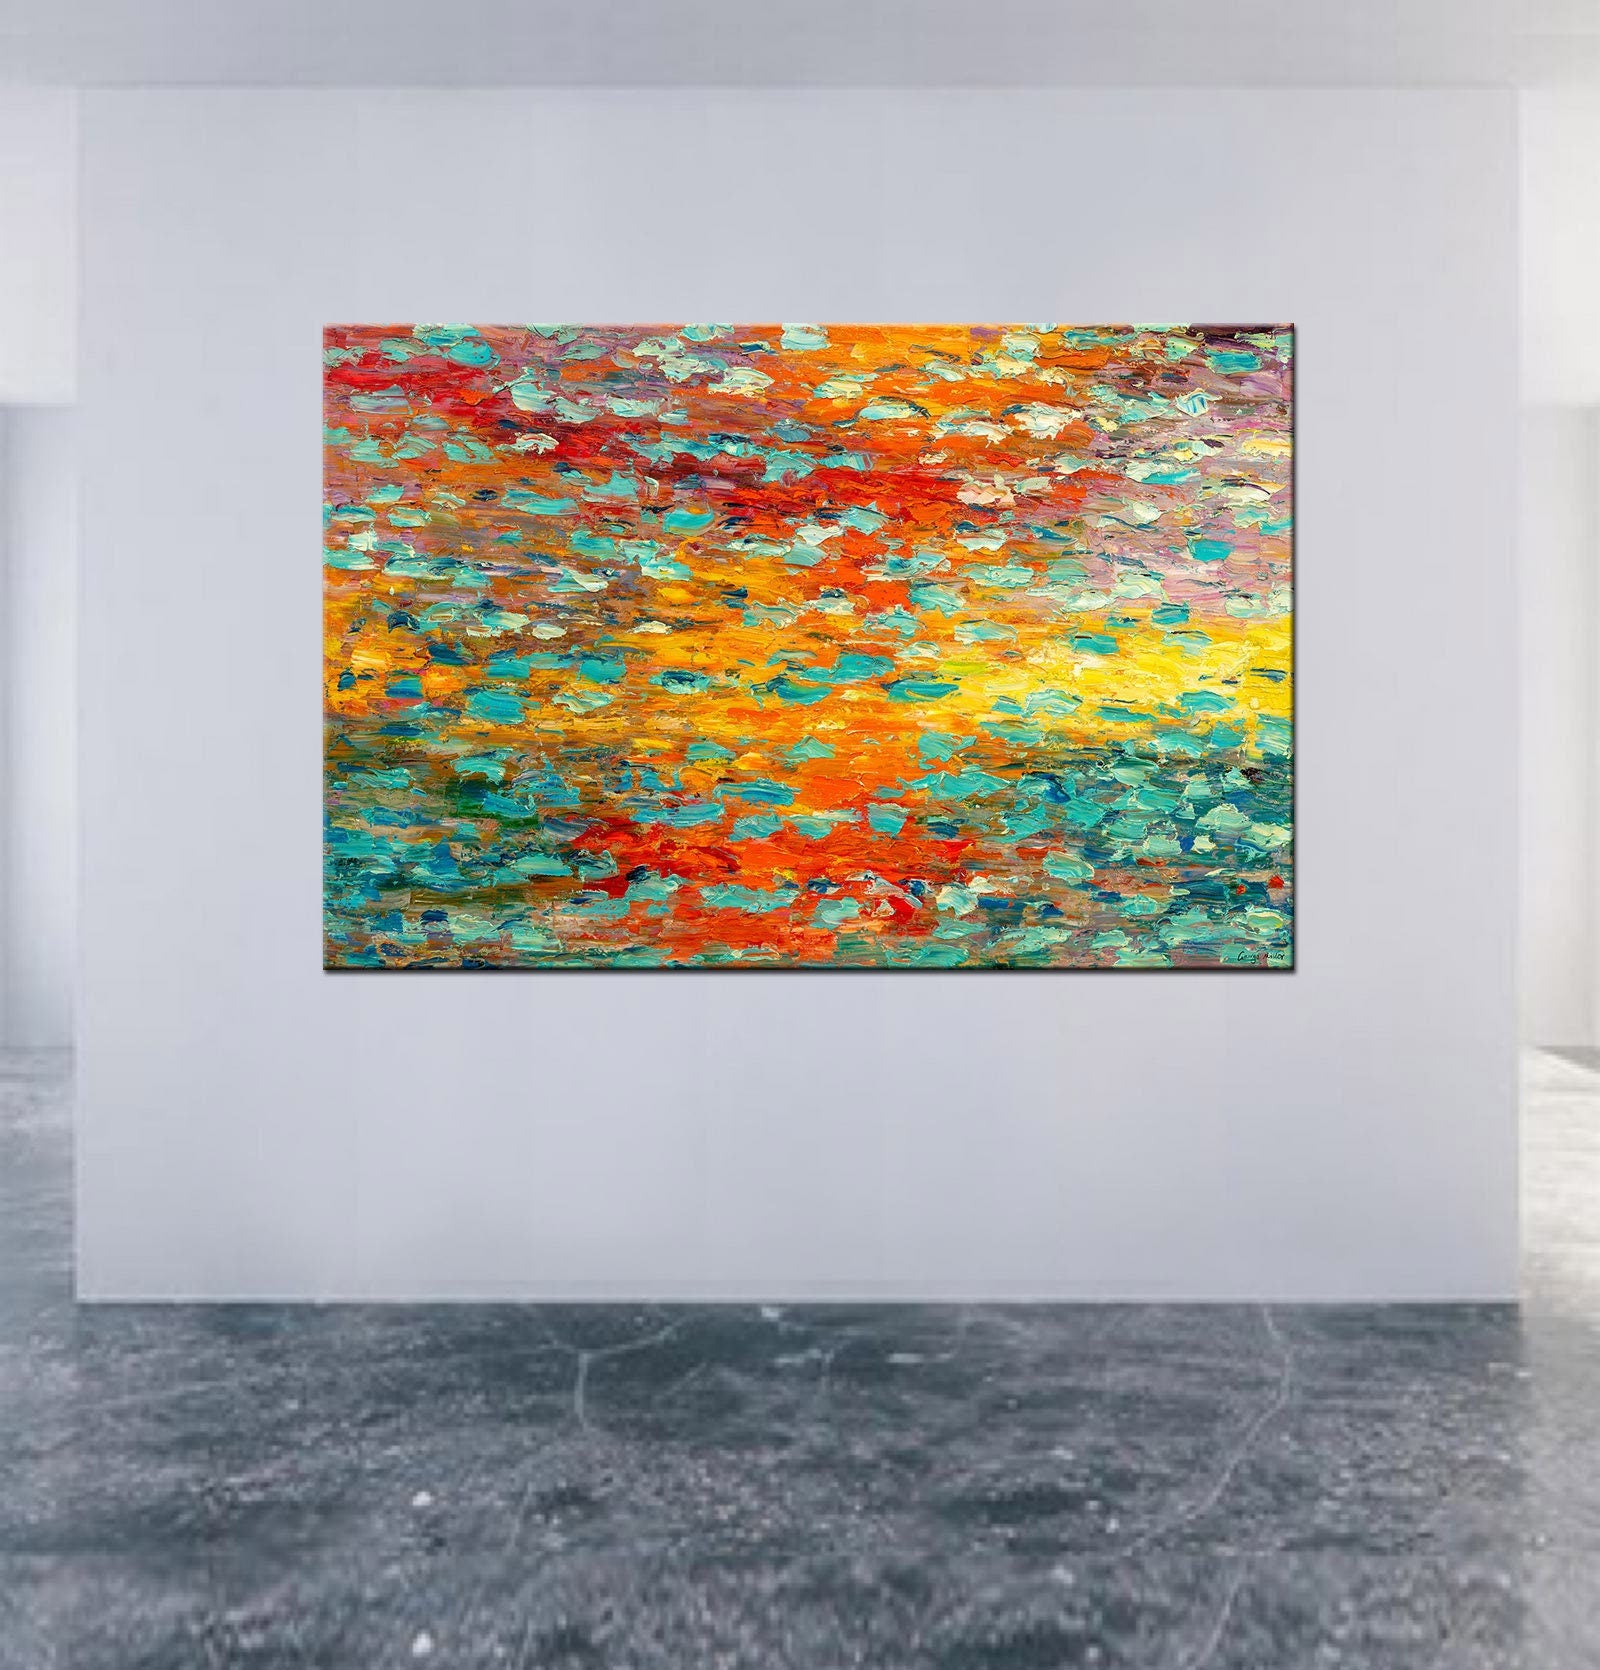 Abstract Art, Abstract Canvas Art, Waterlily Pond, Original Abstract Art, Modern Painting, Large Canvas Painting, Landscape Oil Painting